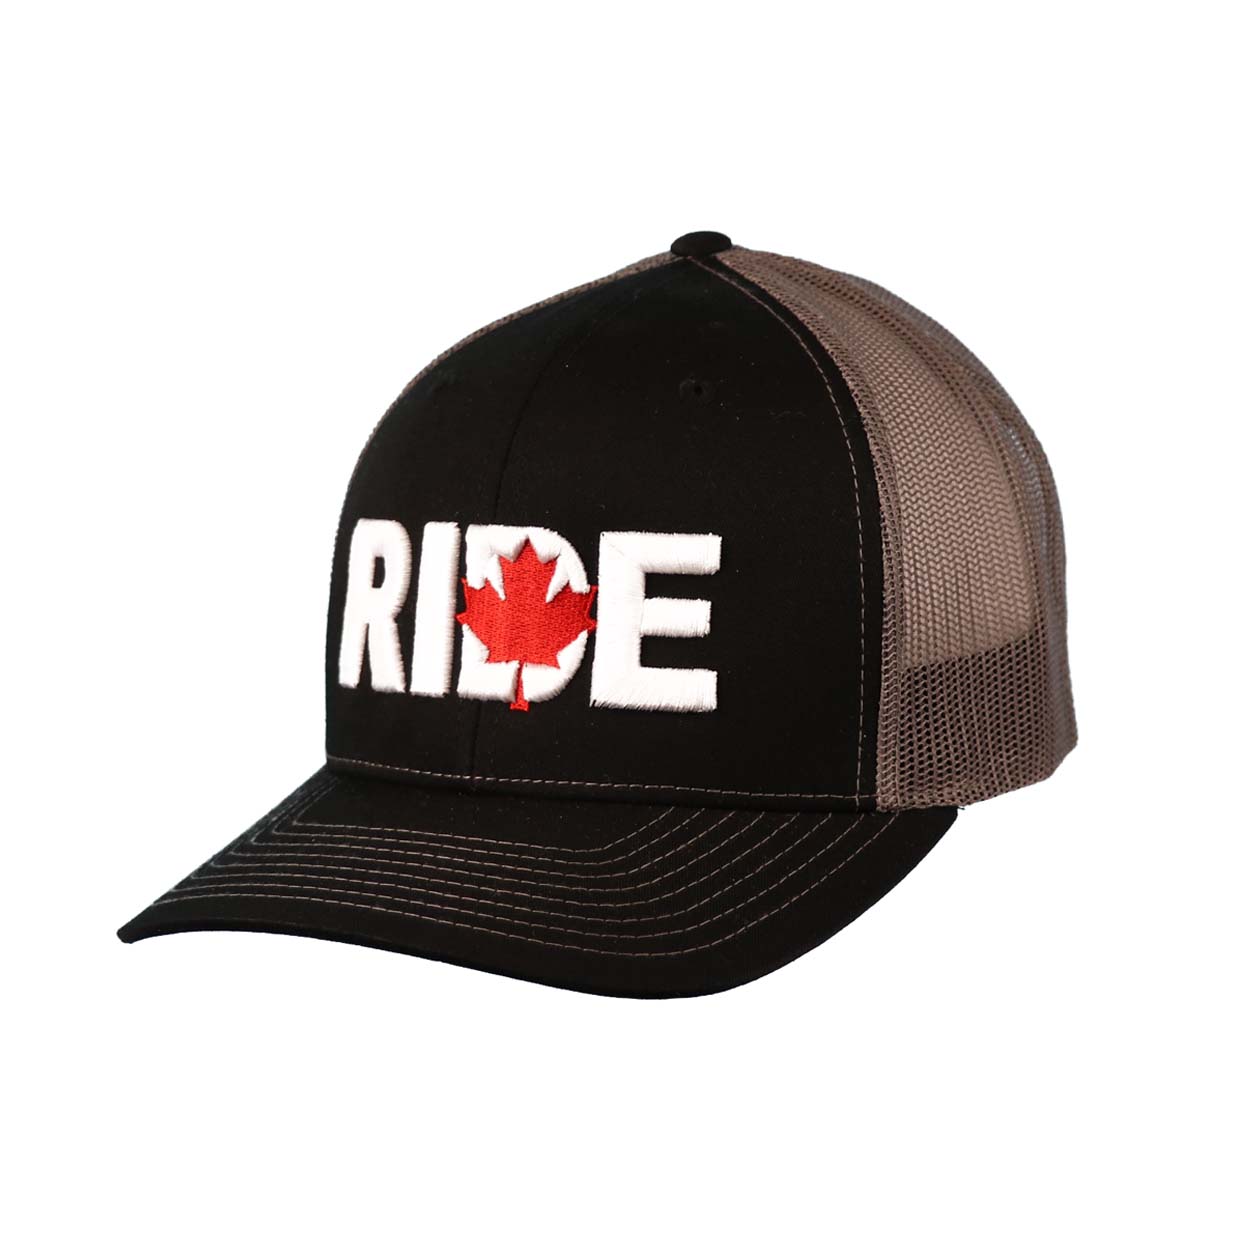 Ride Canada Classic Embroidered Snapback Trucker Hat Black/Red